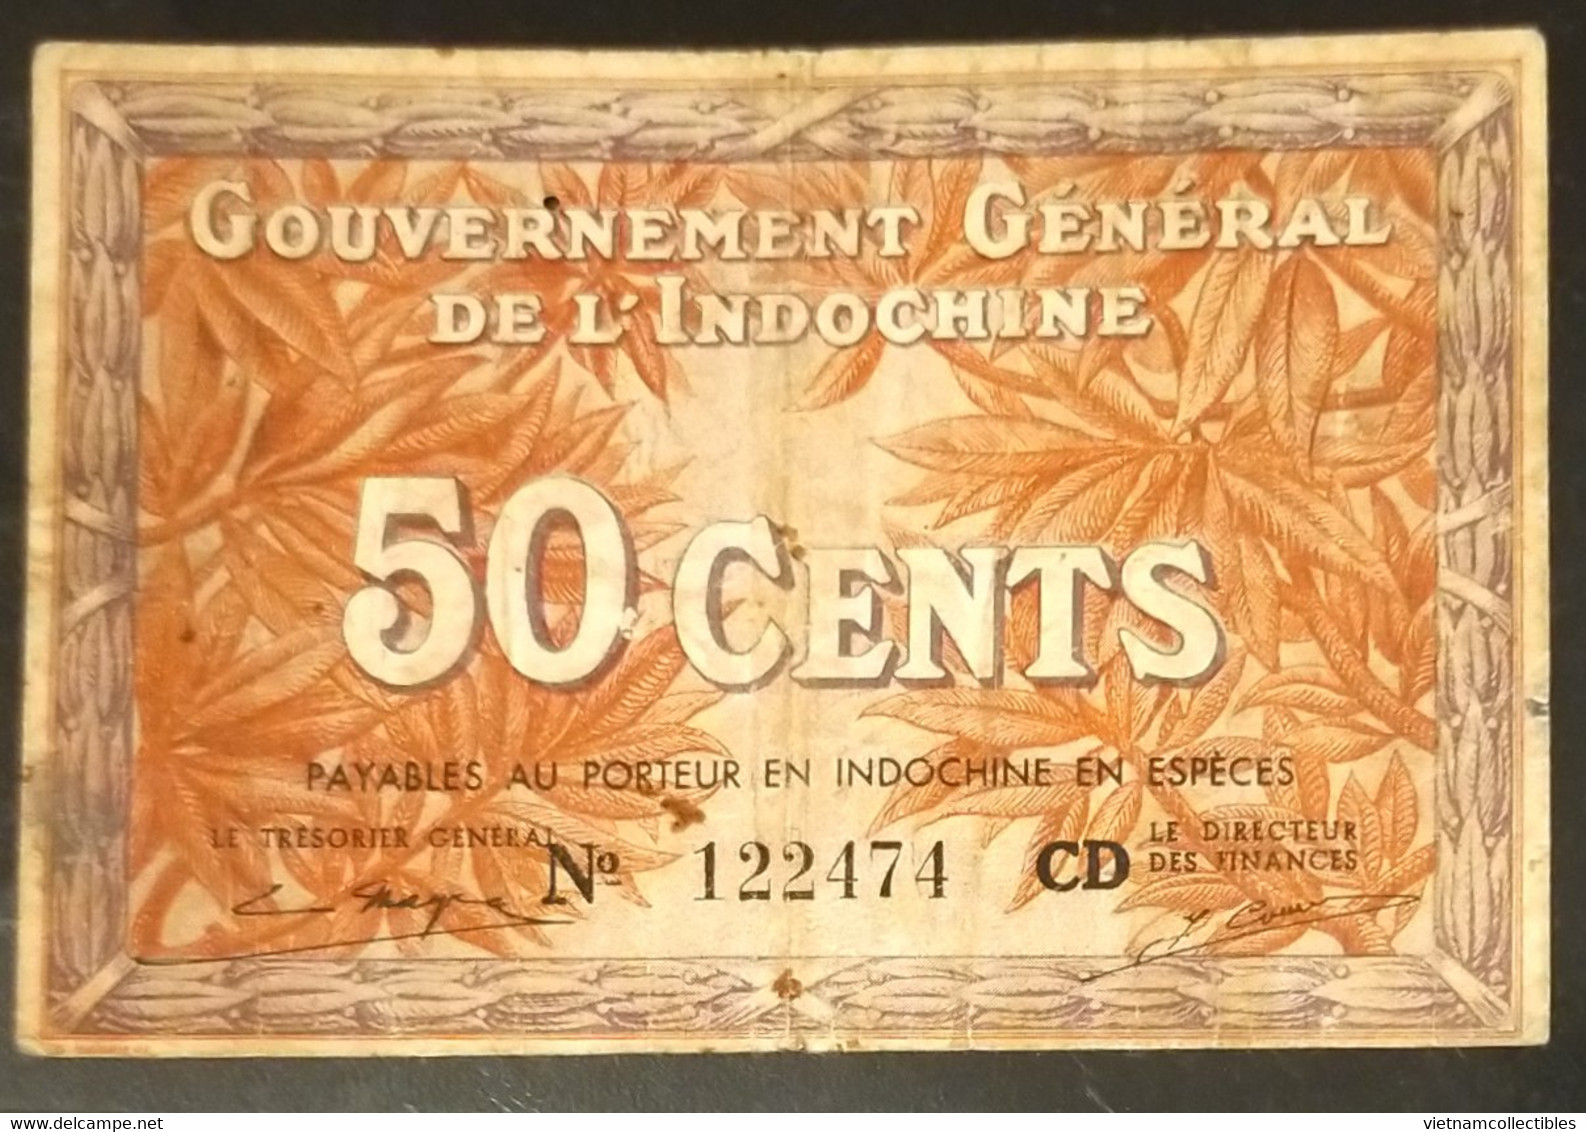 French Indochine Indochina Vietnam Viet Nam Laos Cambodia 50 Cents VF Banknote Note 1939 - Pick # 87e / 2 Photos - Indocina